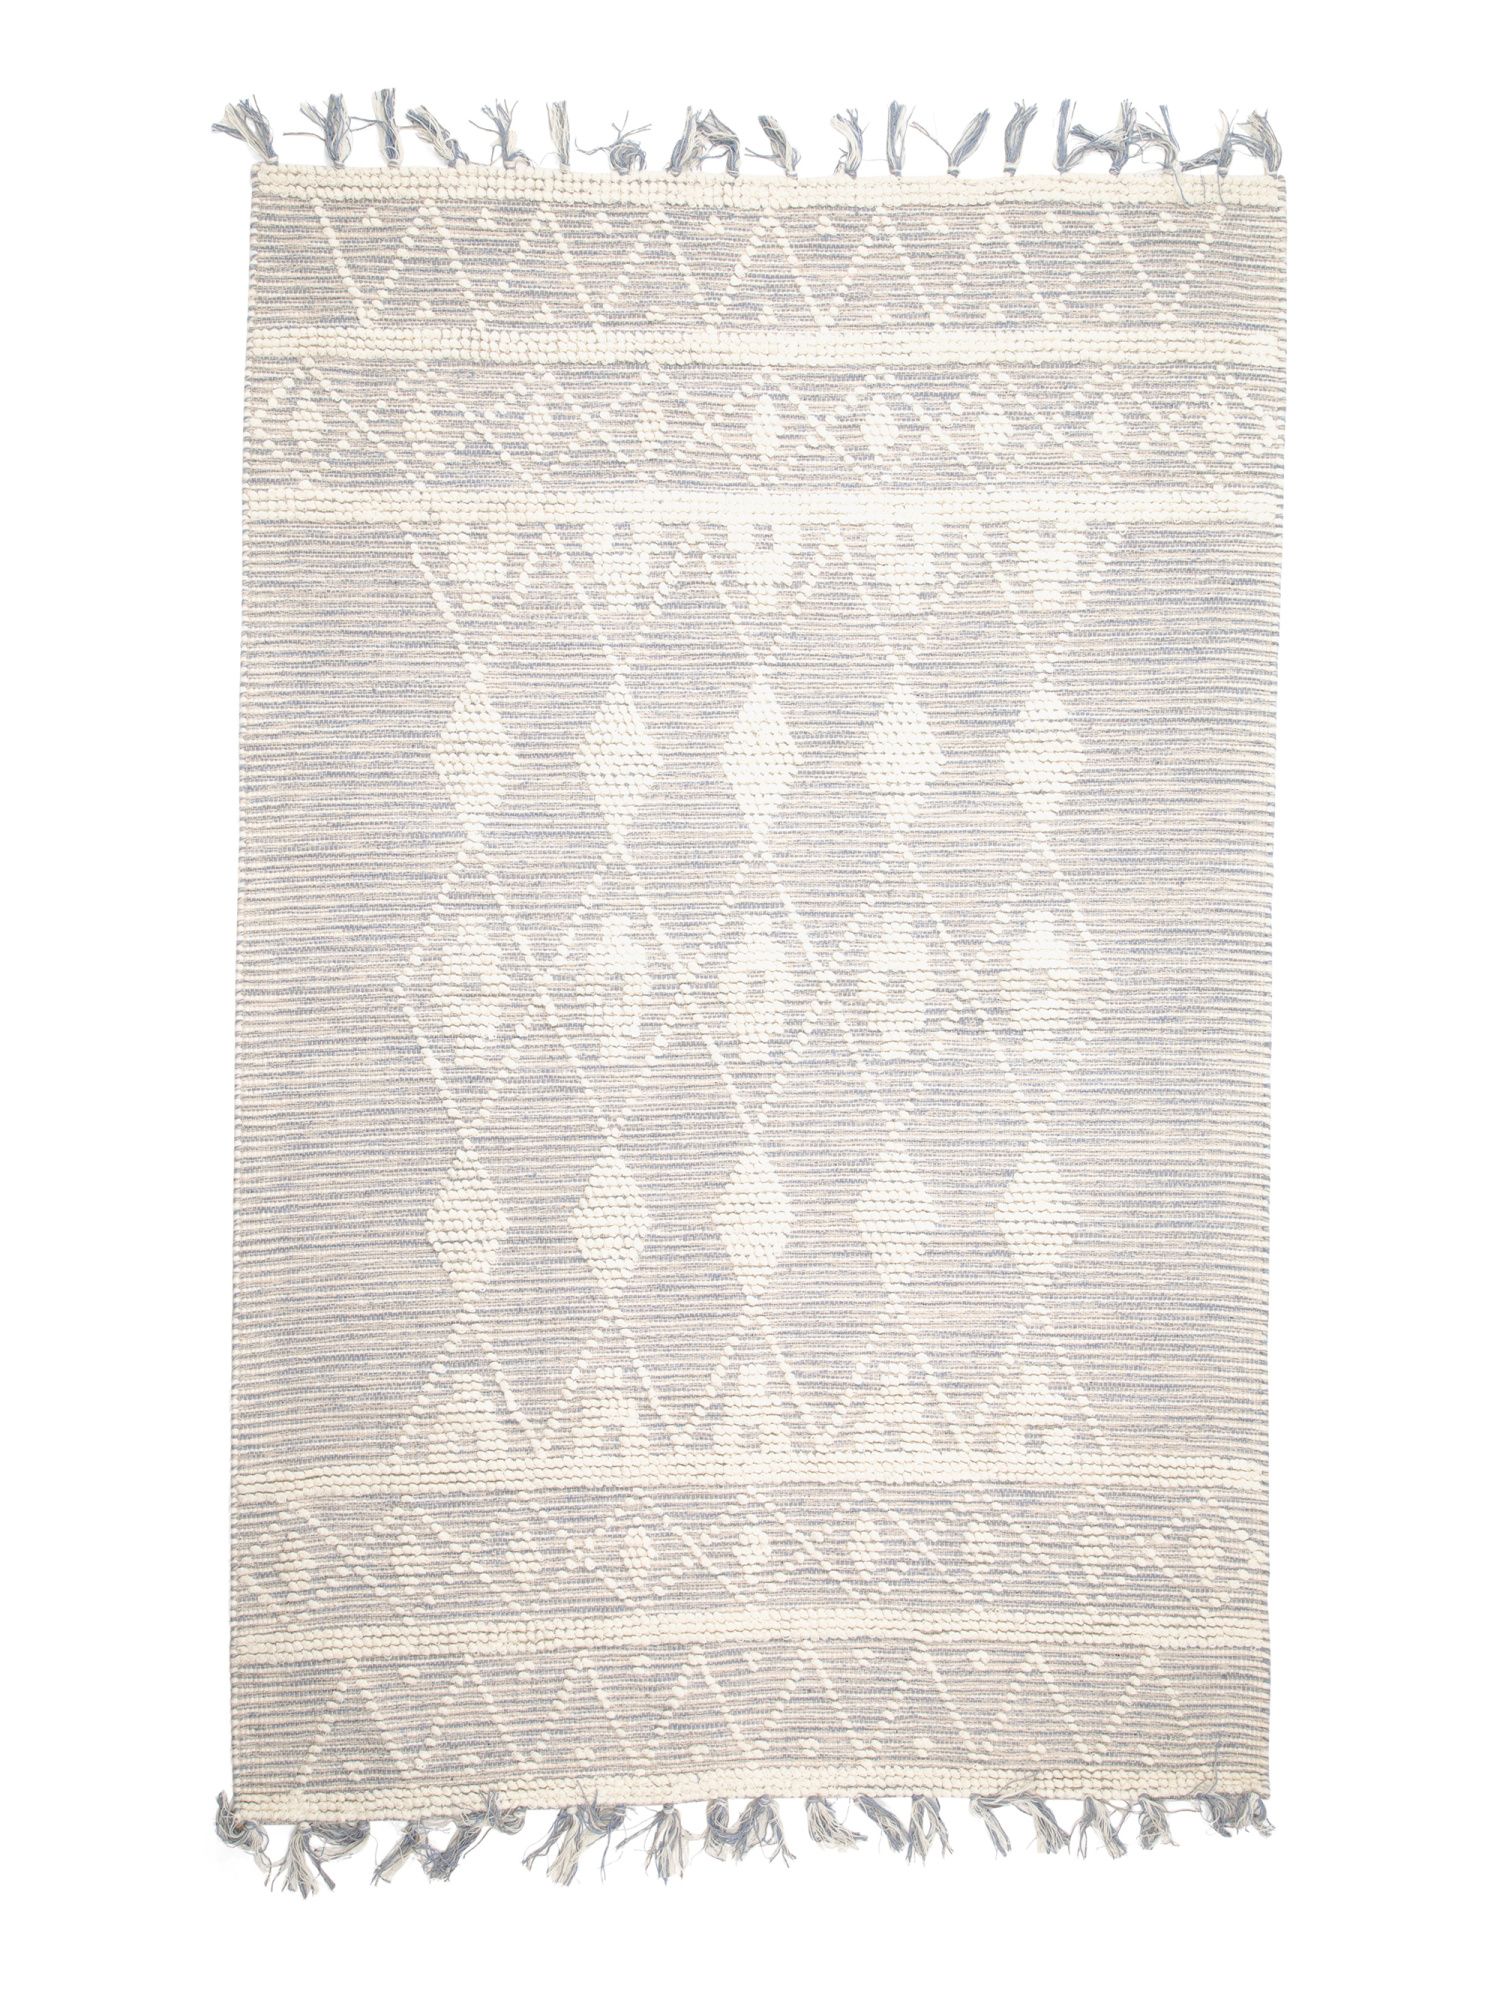 Handwoven Wool Blend  Tufted Area Rug | TJ Maxx